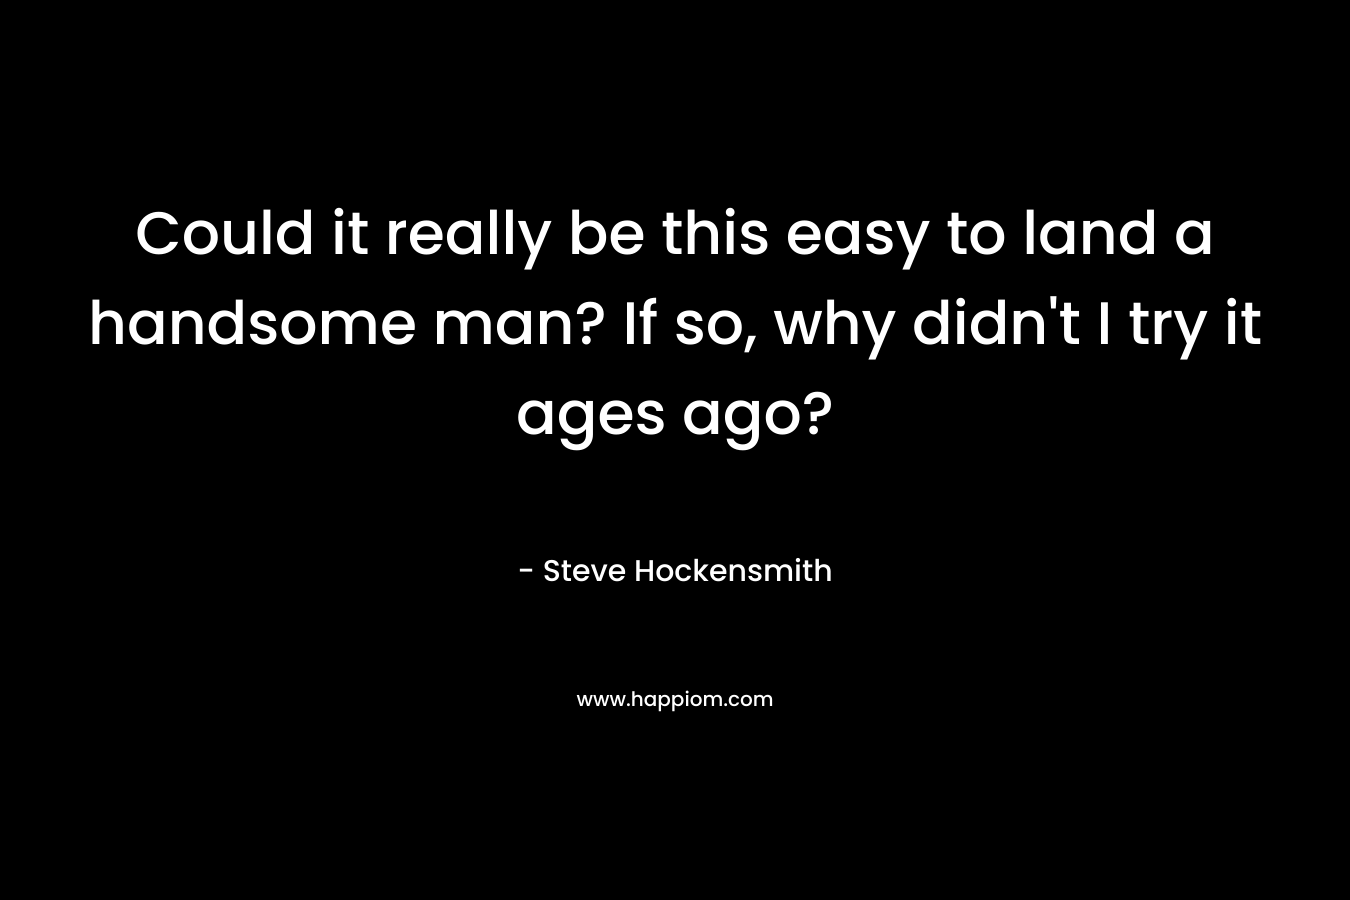 Could it really be this easy to land a handsome man? If so, why didn’t I try it ages ago? – Steve Hockensmith